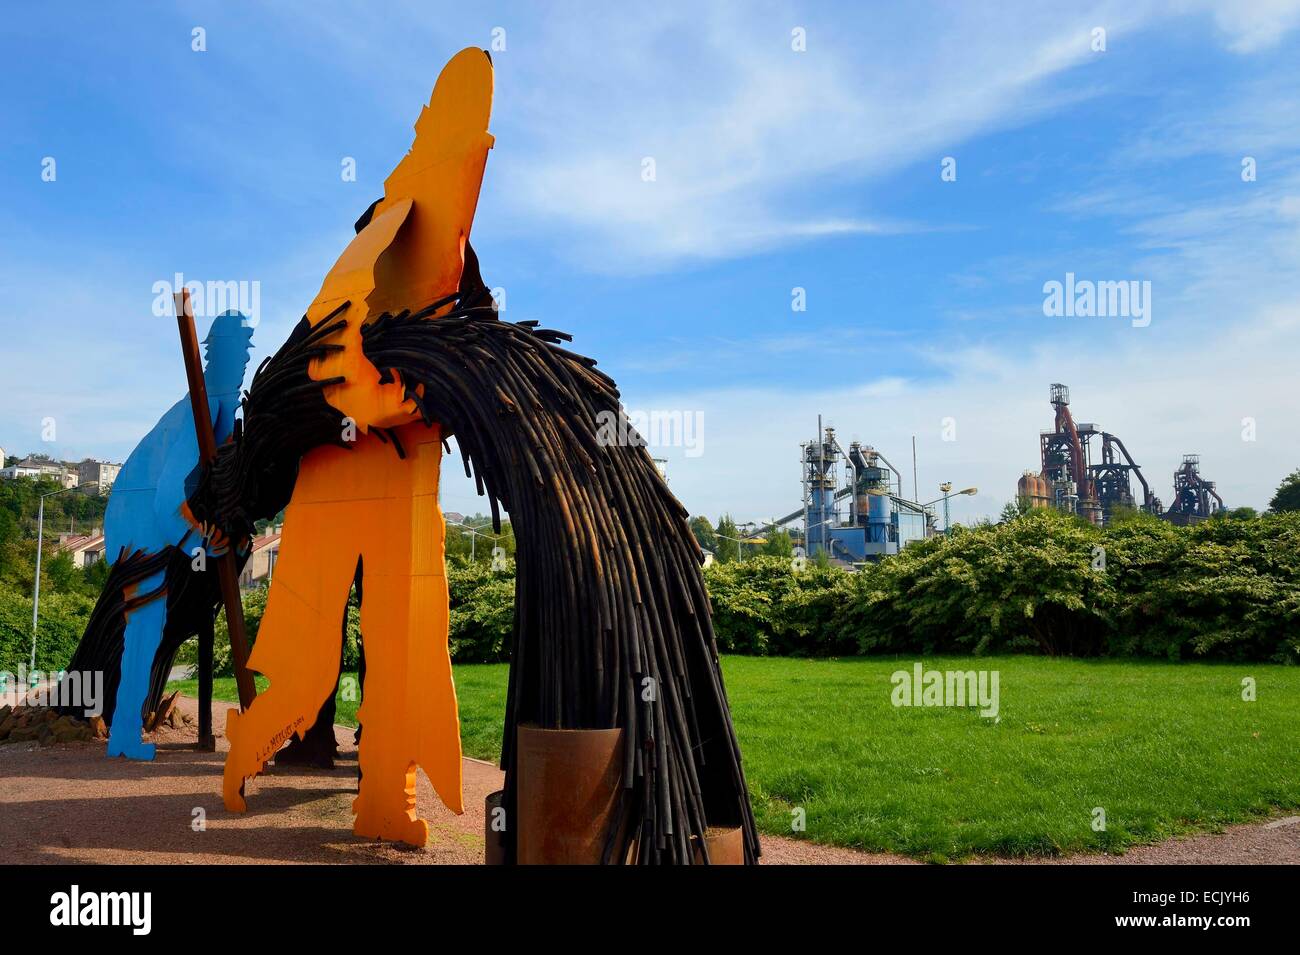 France, Moselle, Fensch Valley, Hayange, Luc Mercier sculpture with the last Blast furnaces (known as of Florange) of ArcelorMittal in the background Stock Photo